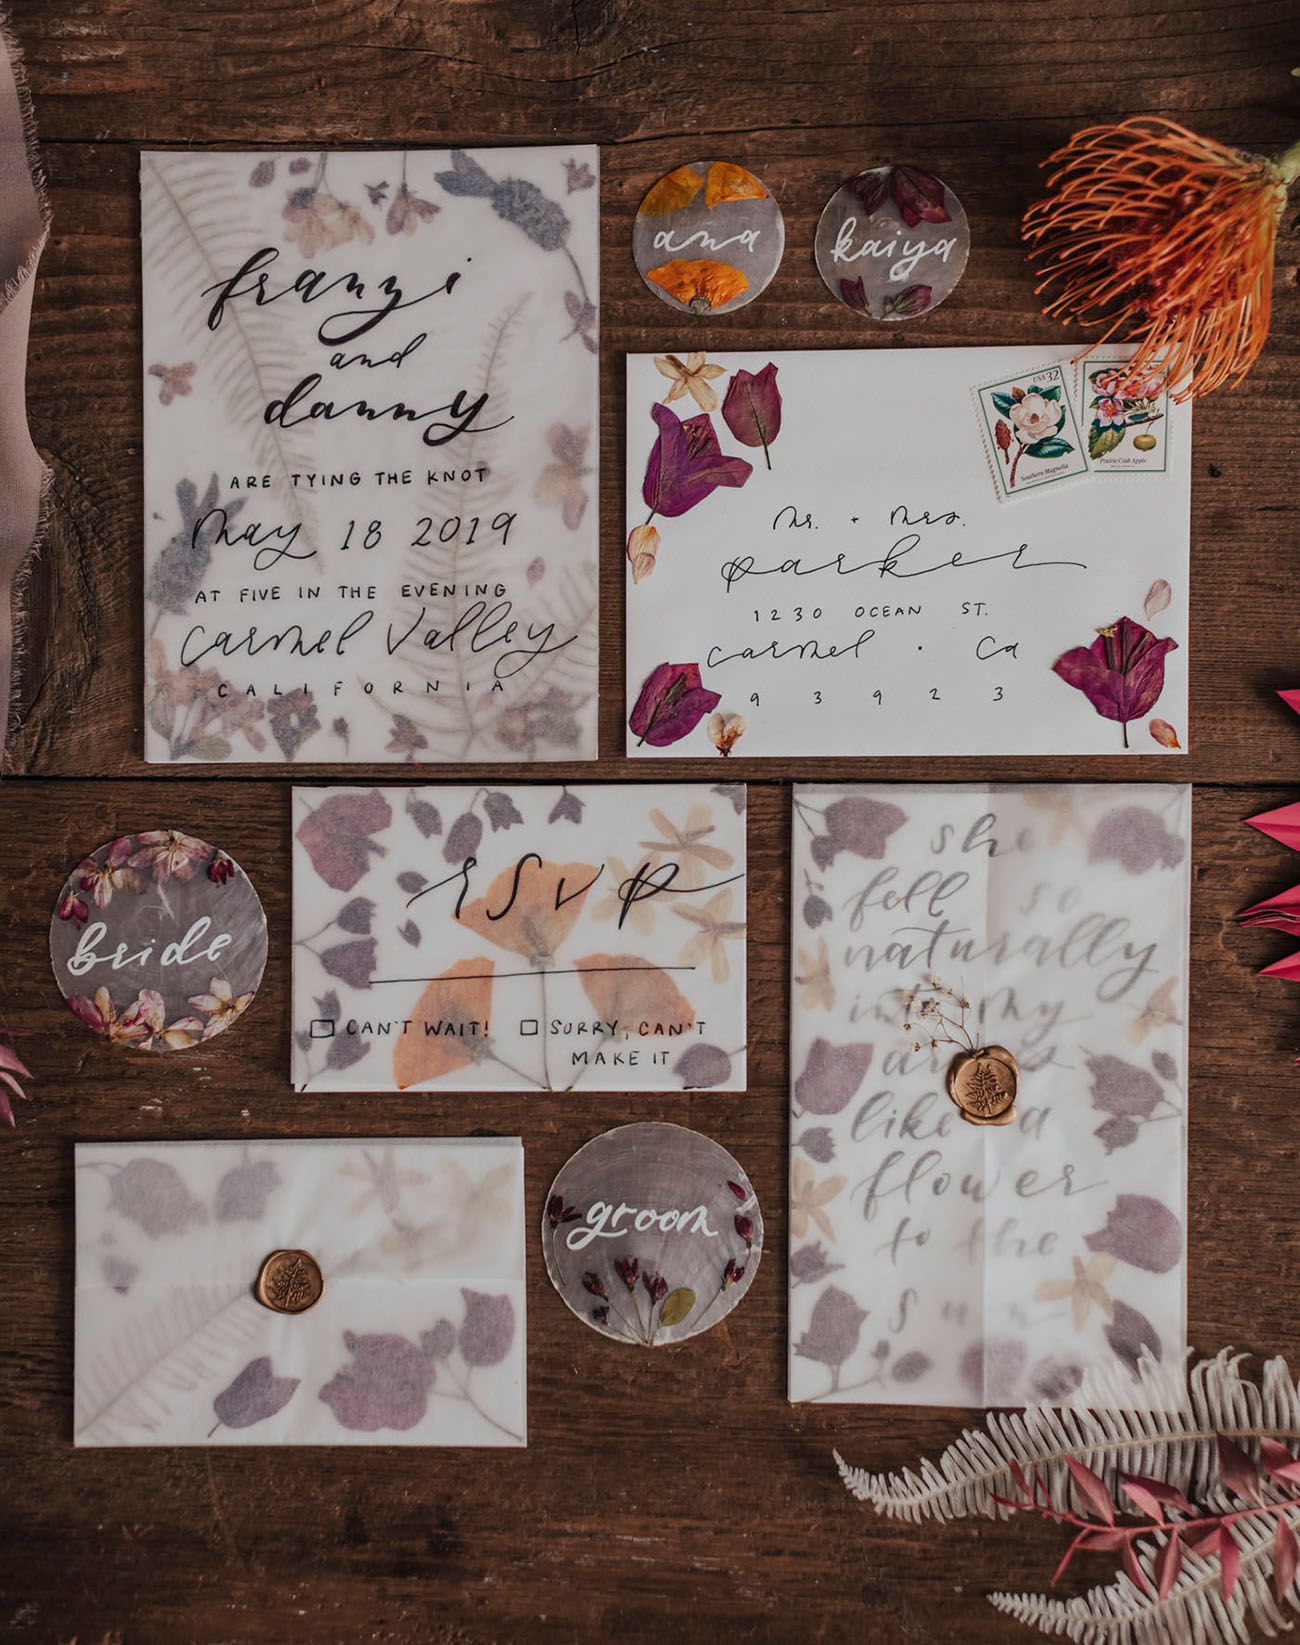 Pressed flowers were first represented in wedding invitations